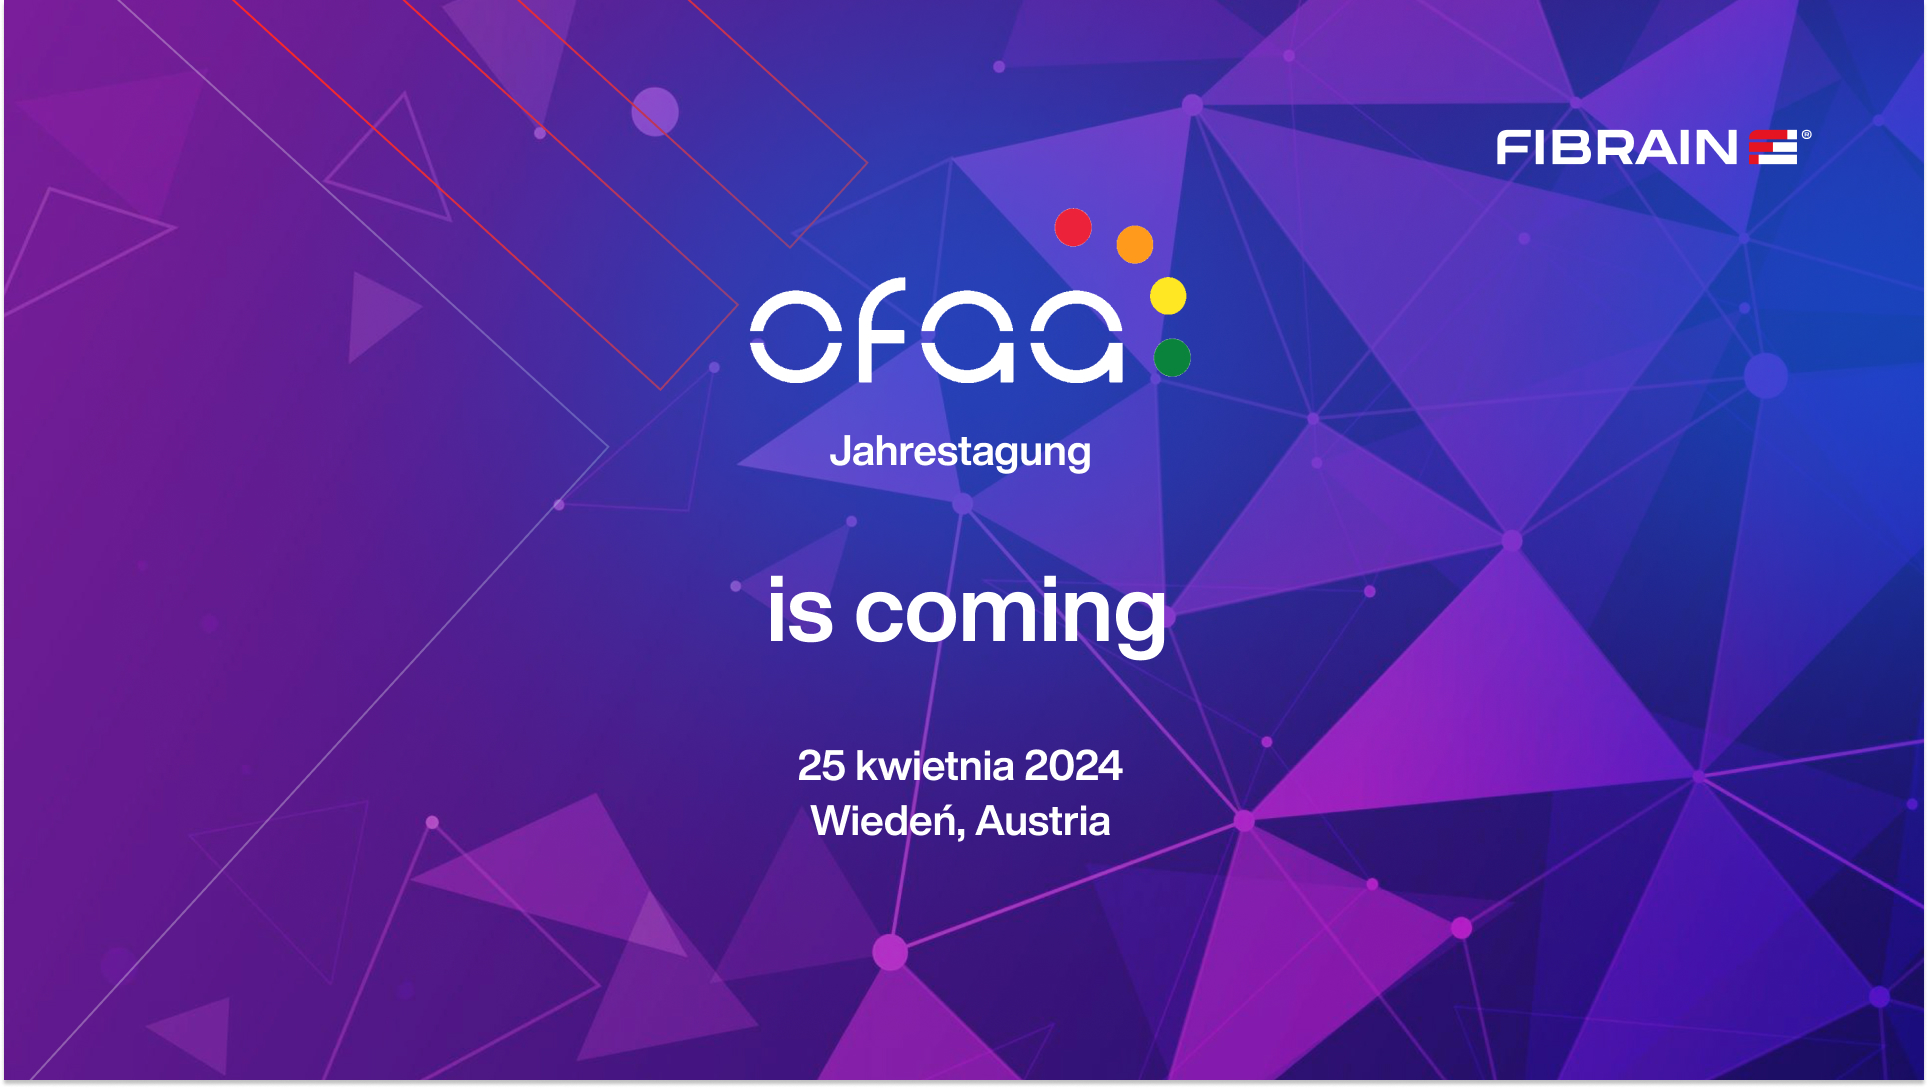 FIBRAIN looks forward to meeting up with you at OFAA Jahrestagung 2024 in Austria!